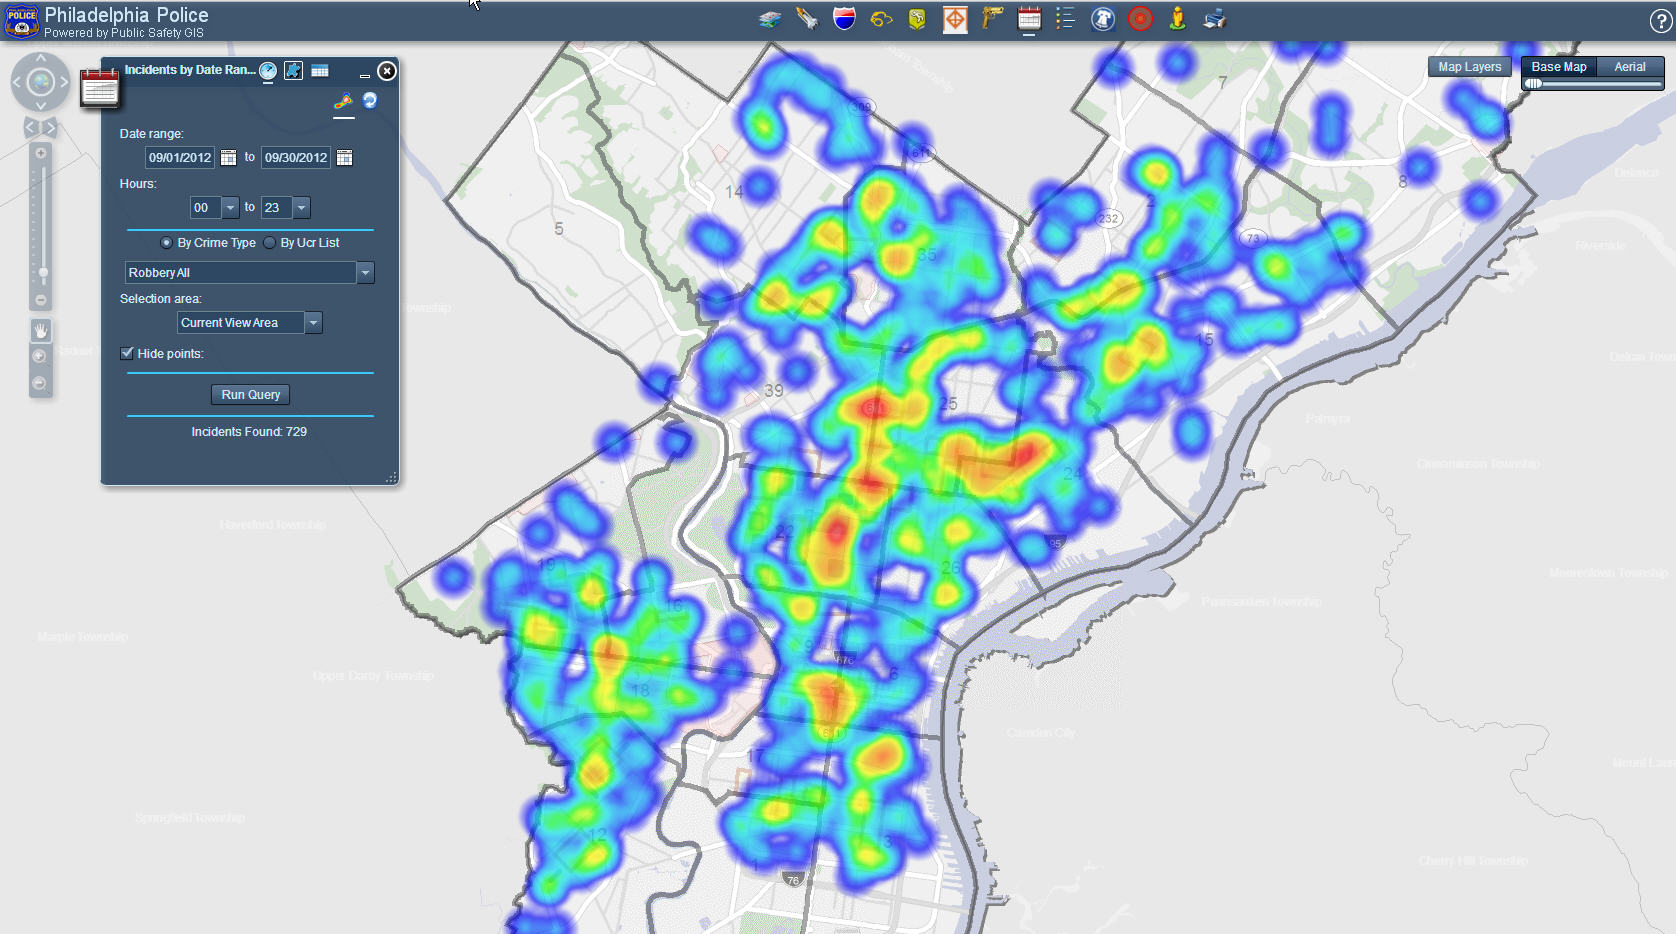 A screenshot of the heat map feature on the Police Department’s updated GIS system, developed by Grant Ervin and his team.